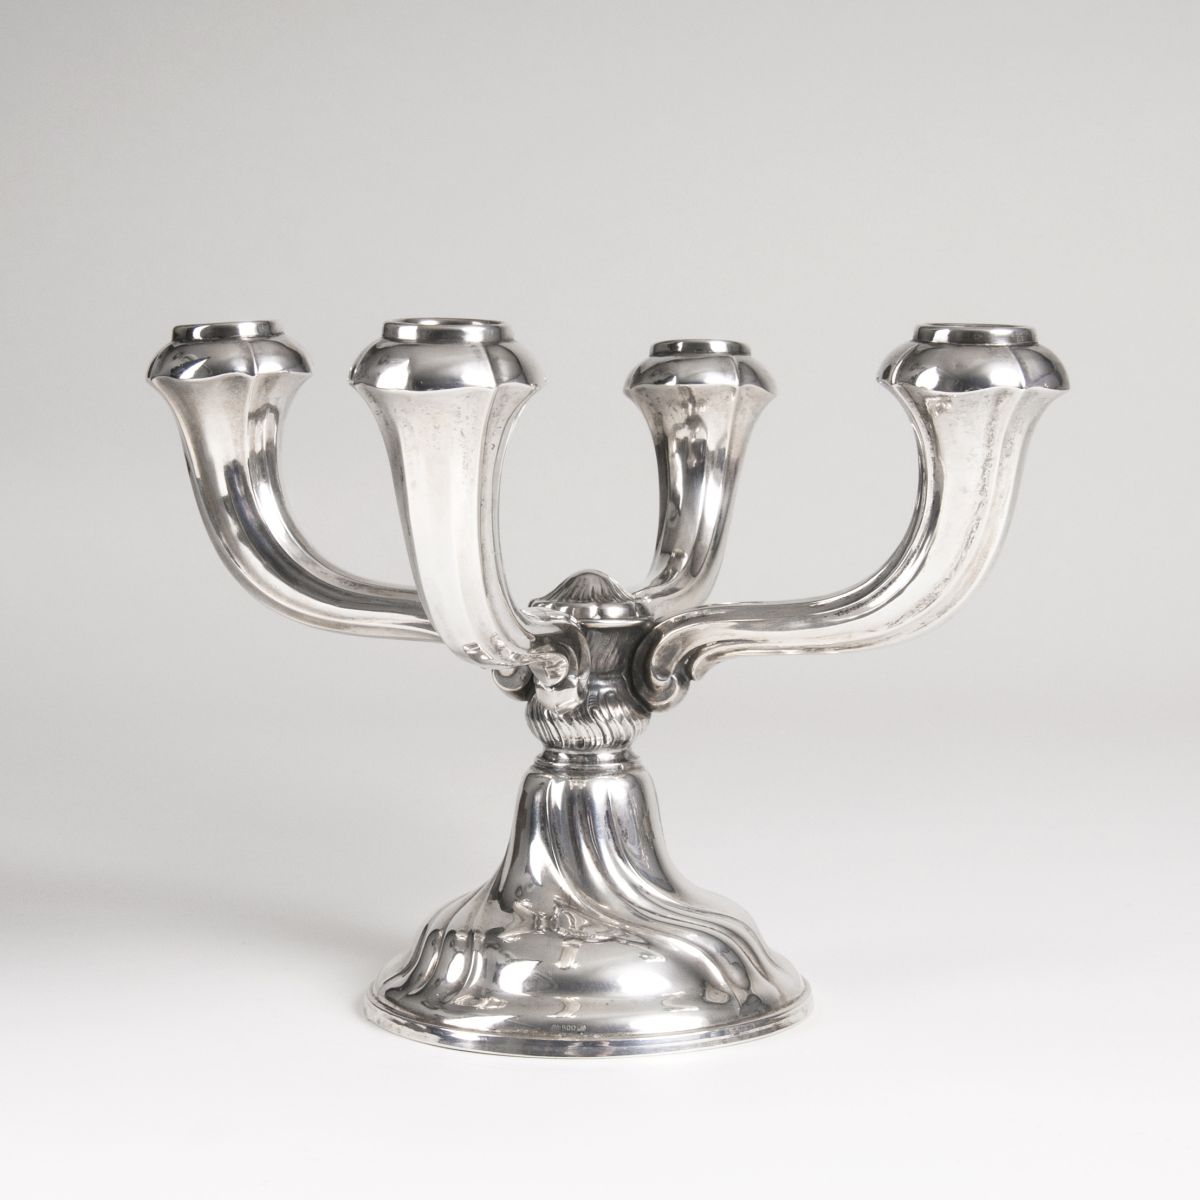 A small candle holder in baroque style